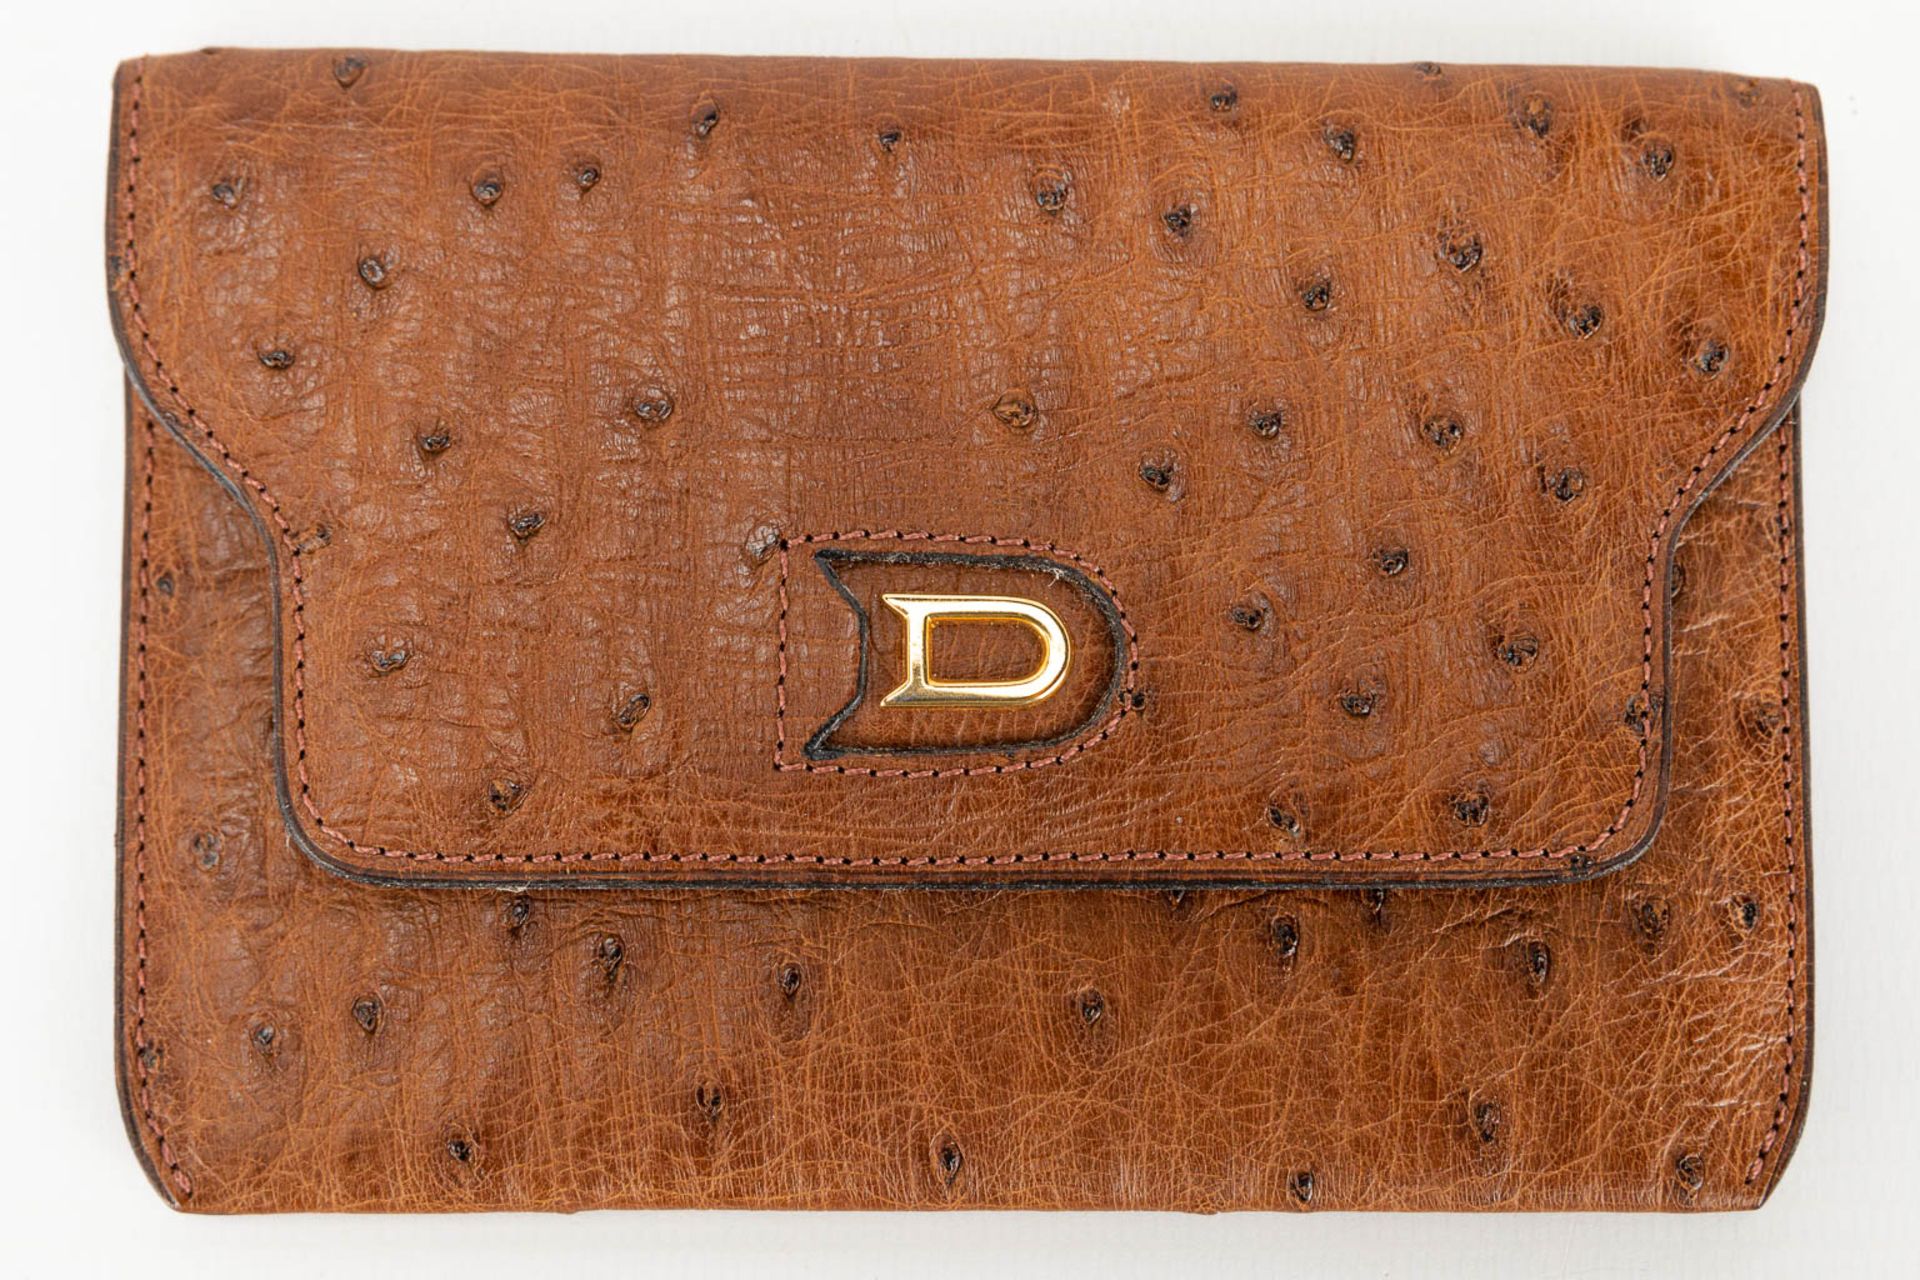 A collection of 3 ladies wallets made of leather and marked Delvaux - Image 10 of 14